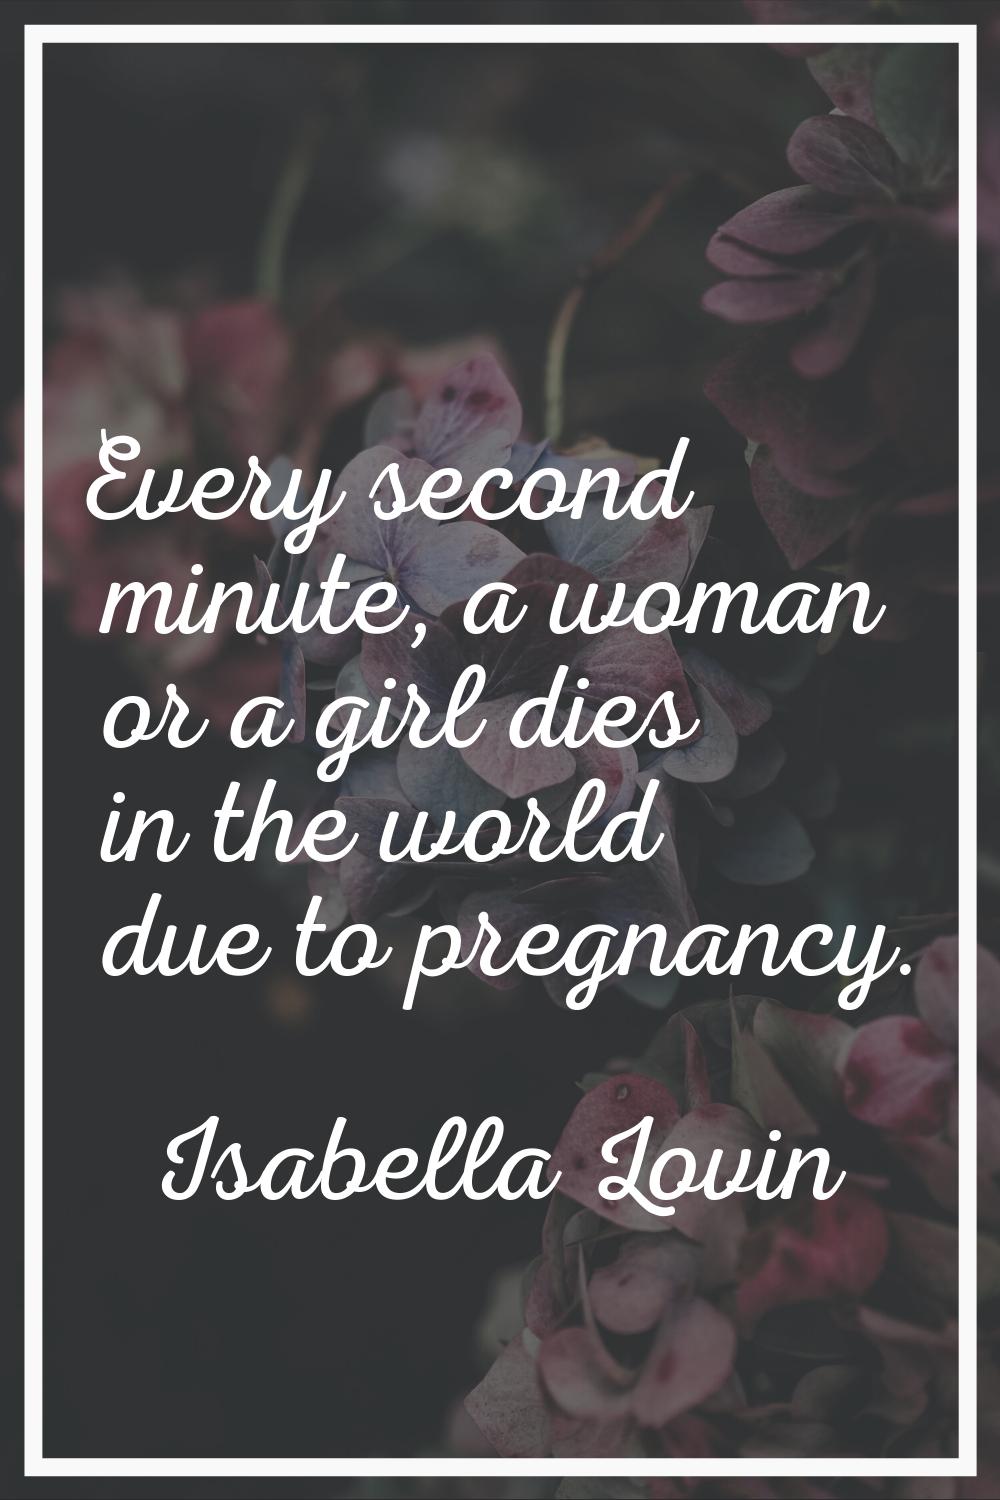 Every second minute, a woman or a girl dies in the world due to pregnancy.